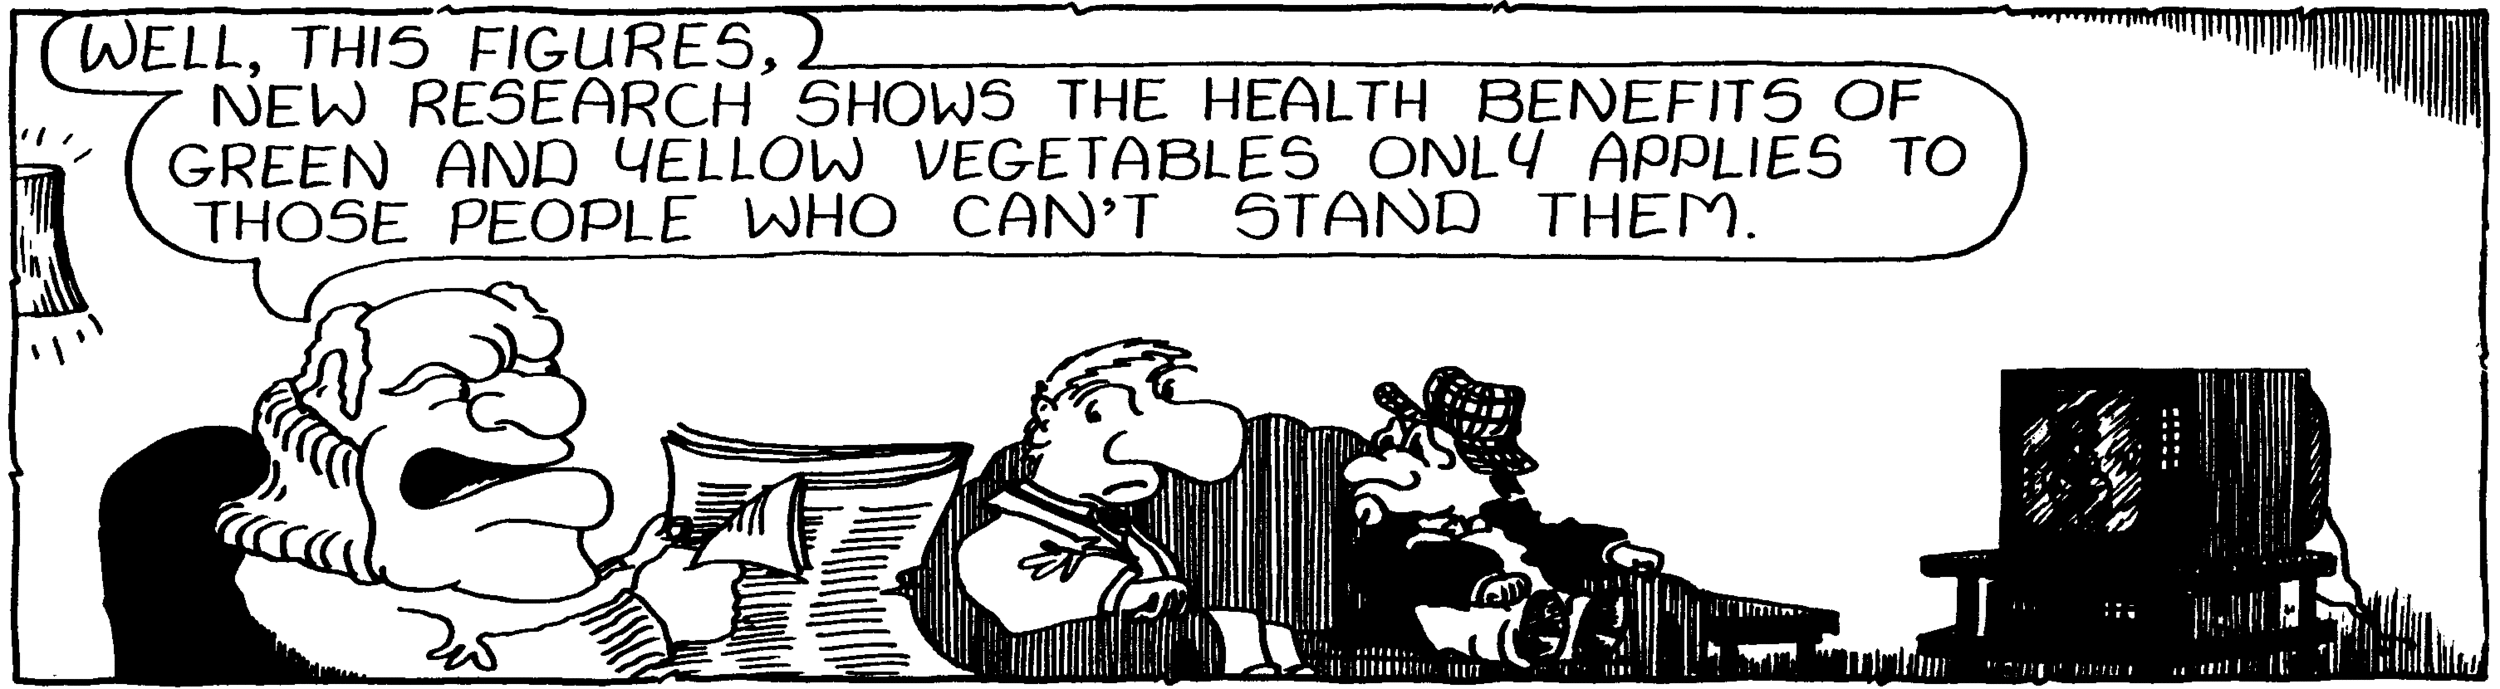 free cartoon about public health wellness diet and vegetables